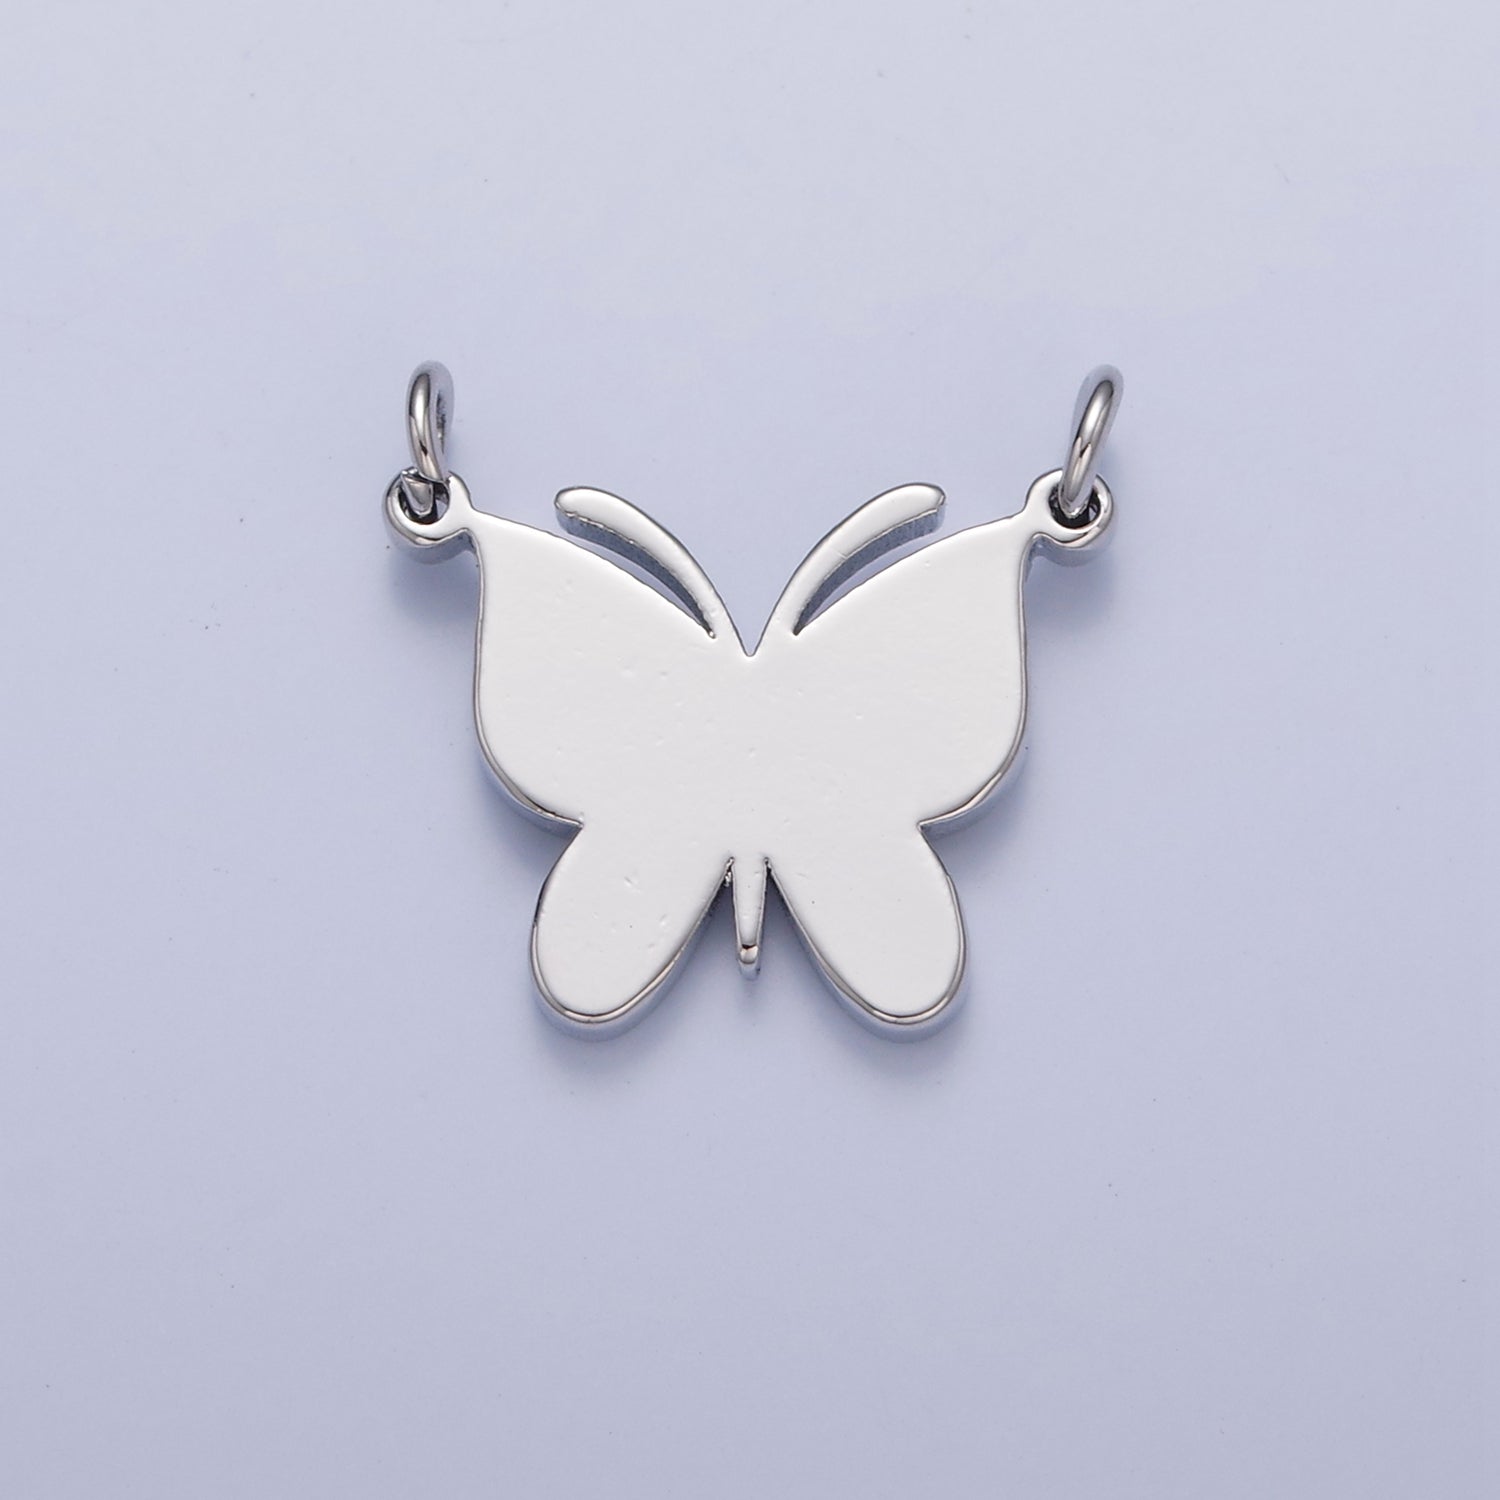 Dainty Gold Flat Butterfly Charm Connector Pendant for Necklace Bracelet 14K or 24K Gold Filled W-570 - DLUXCA